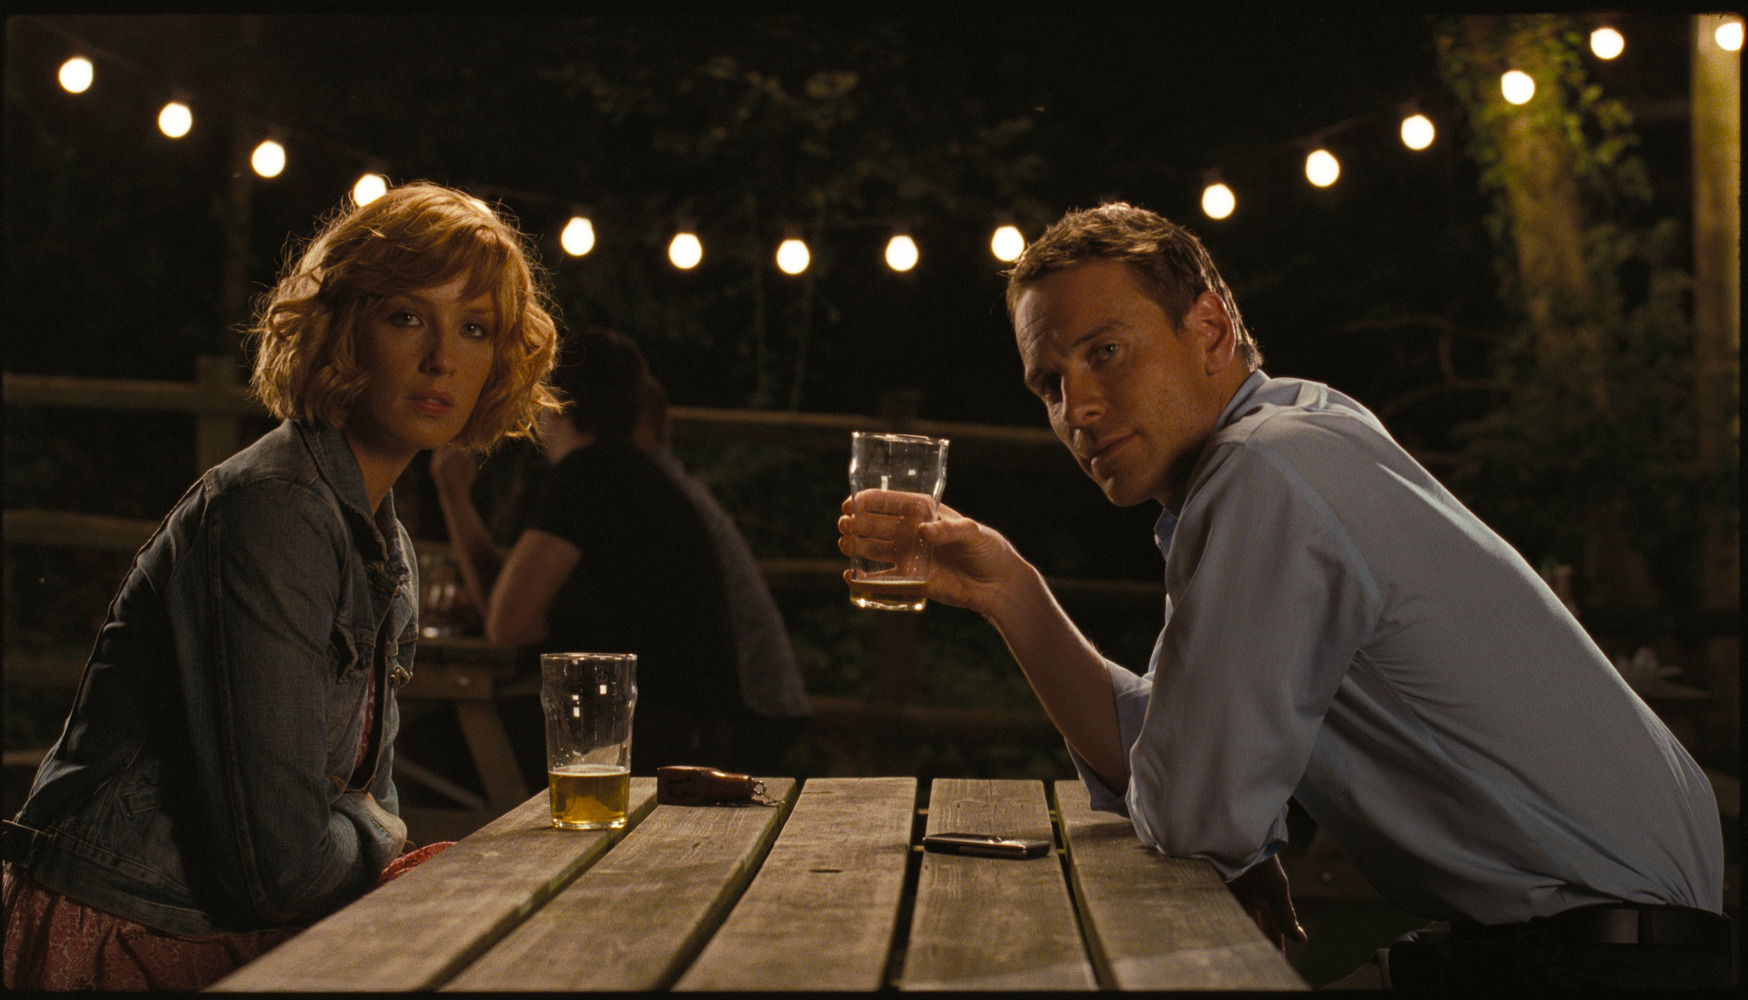 Kelly Reilly and Michael Fassbender drinking beers.